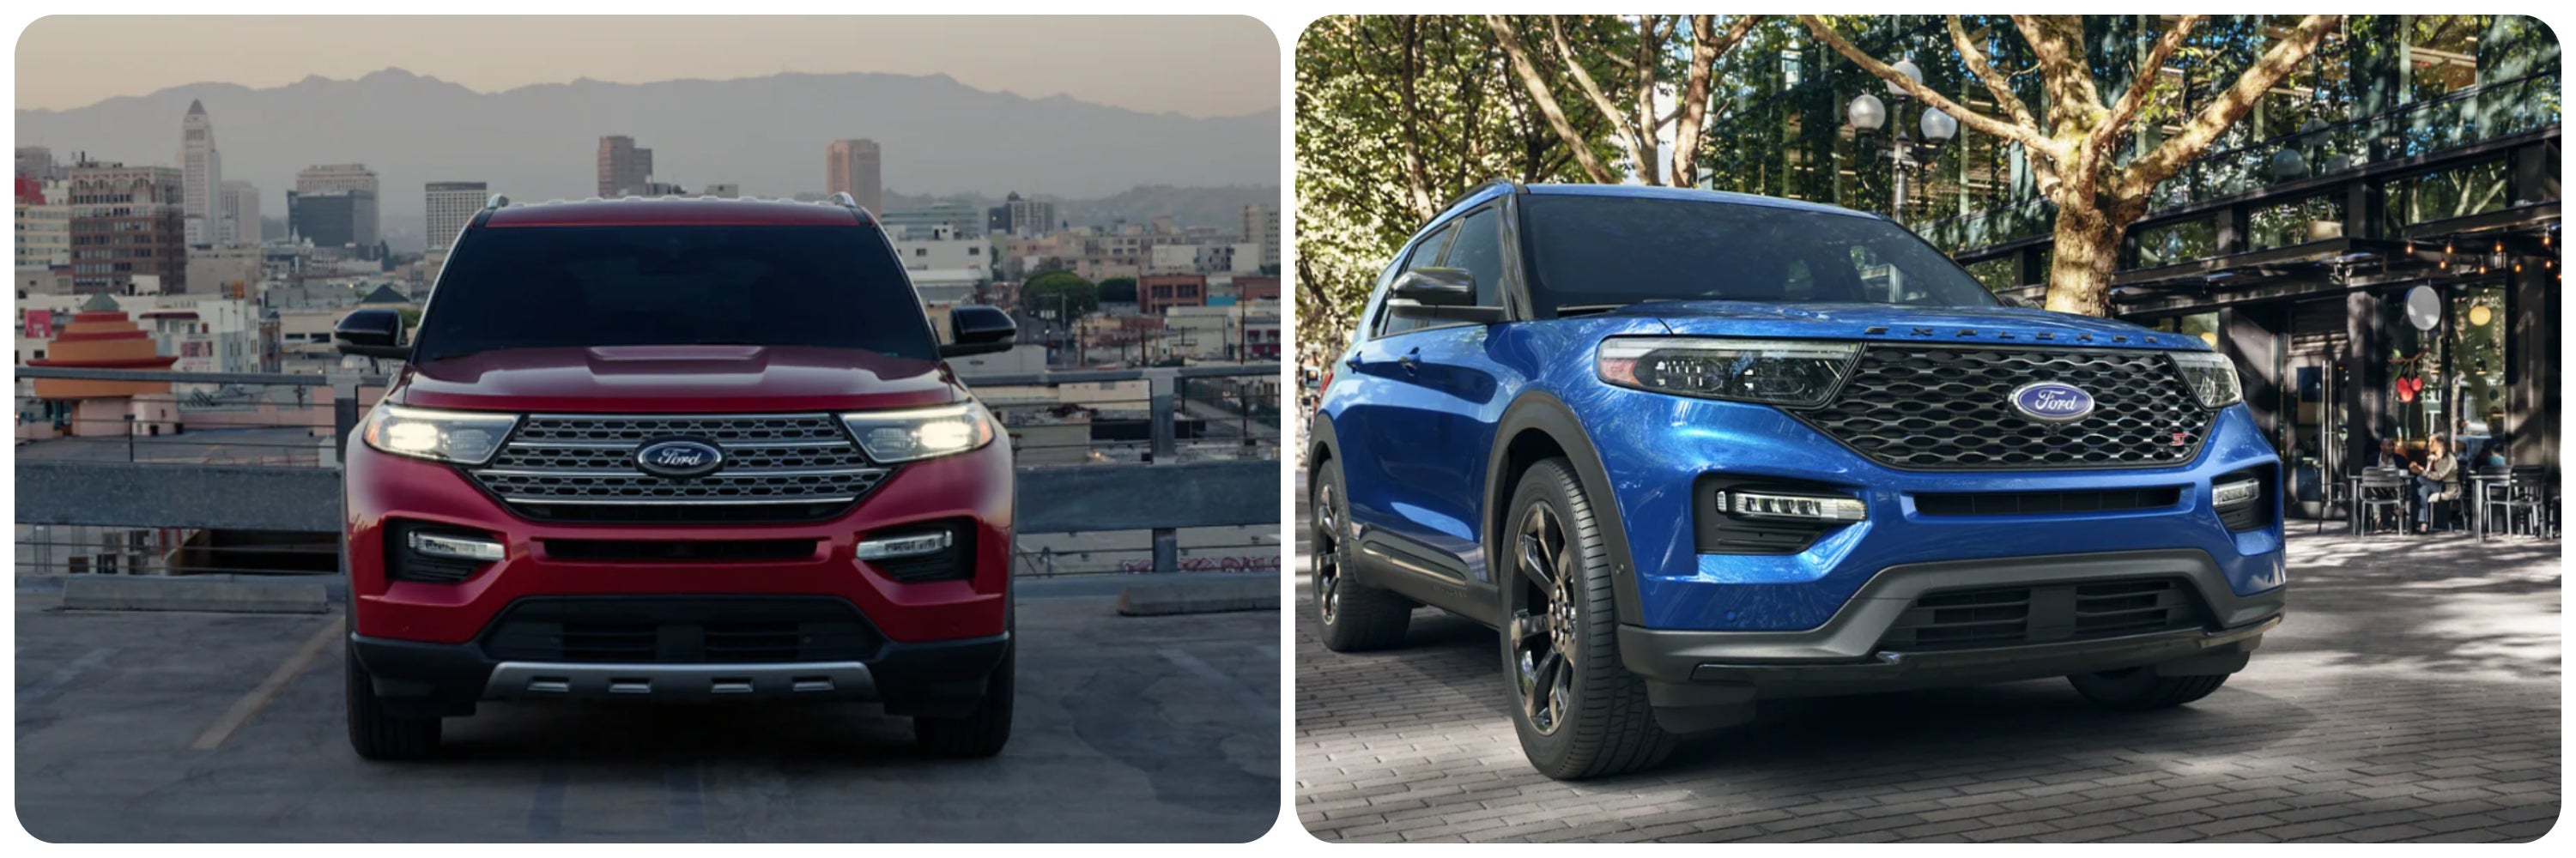 On the left a red 2023 Ford Explorer sits parked facing the viewer, and on the right a blue 2022 Ford Explorer sits parked facing the viewer